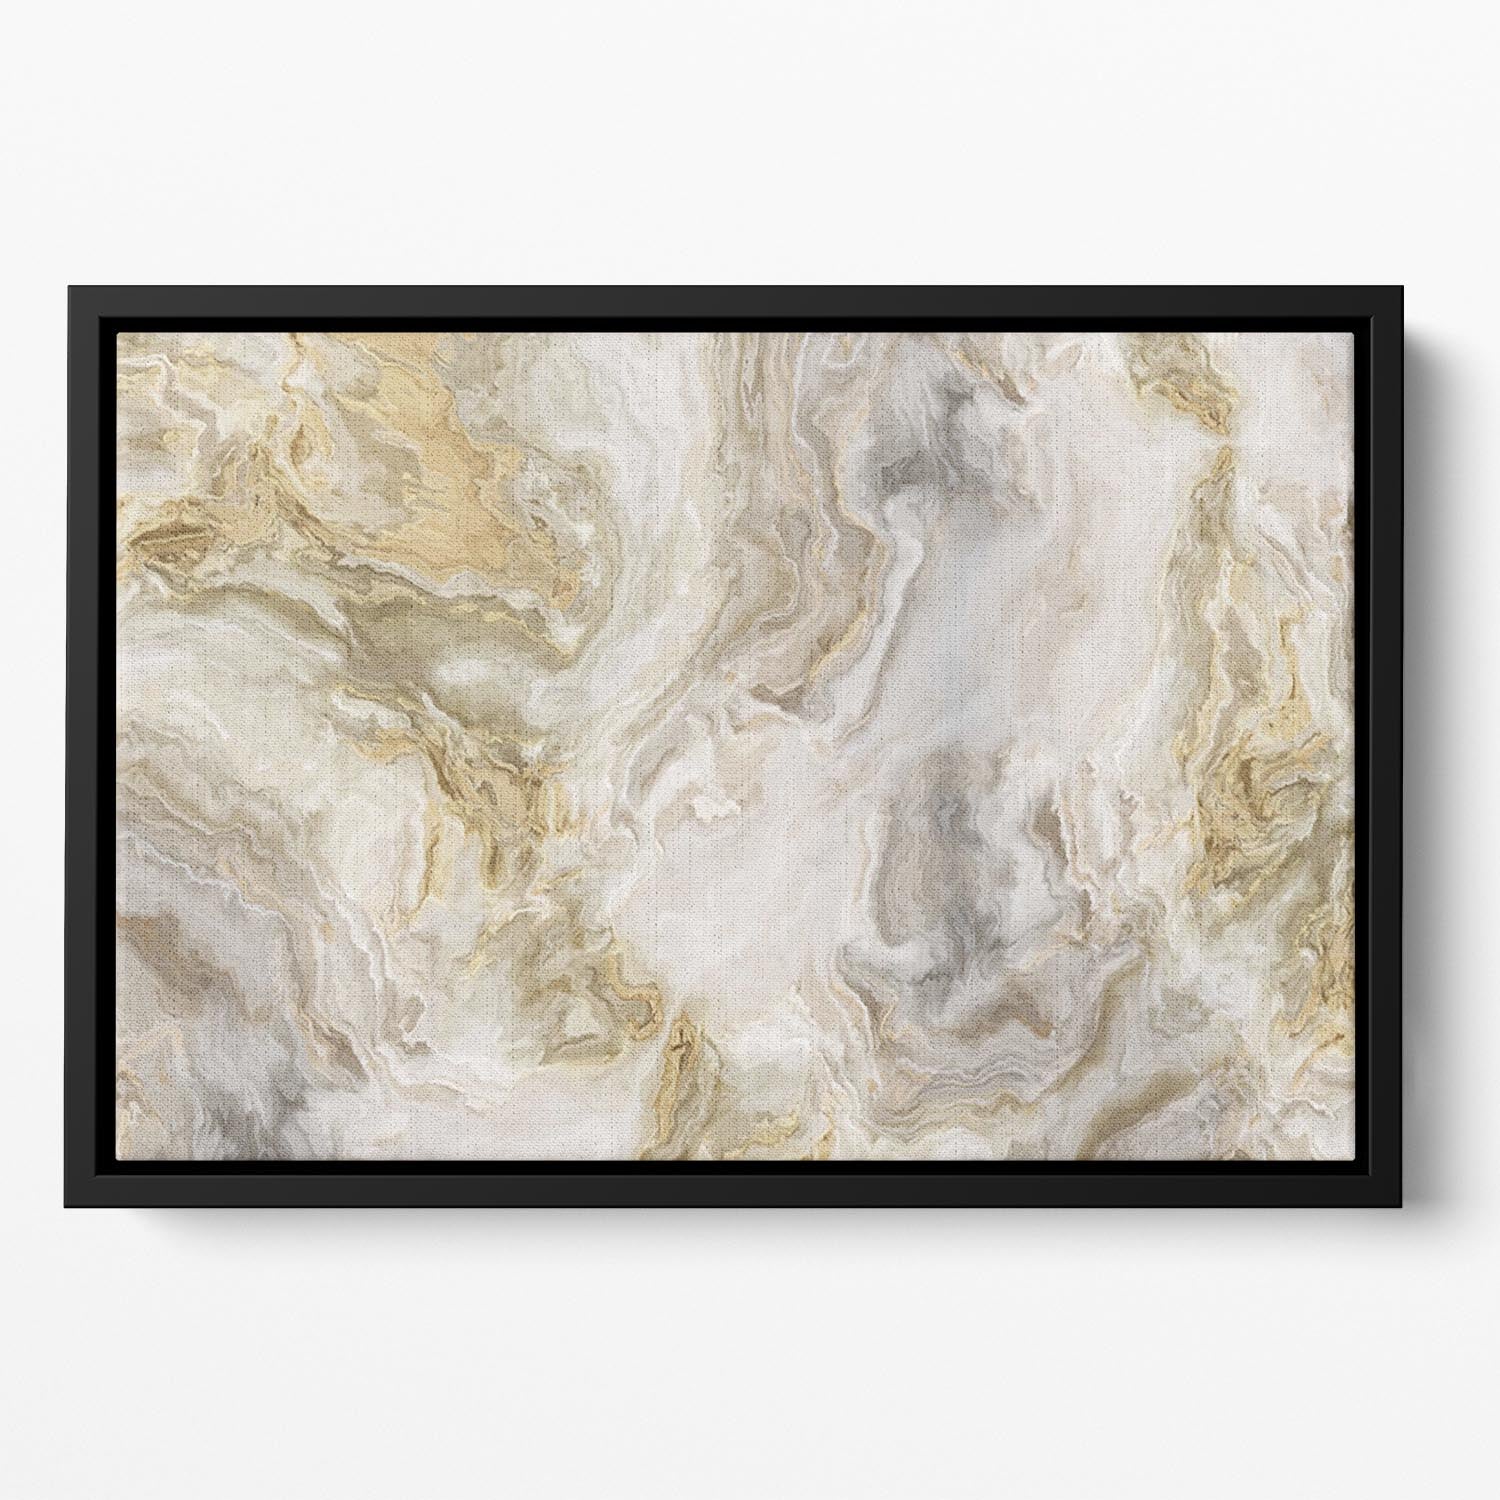 Swirled White Grey and Gold Marble Floating Framed Canvas - Canvas Art Rocks - 2